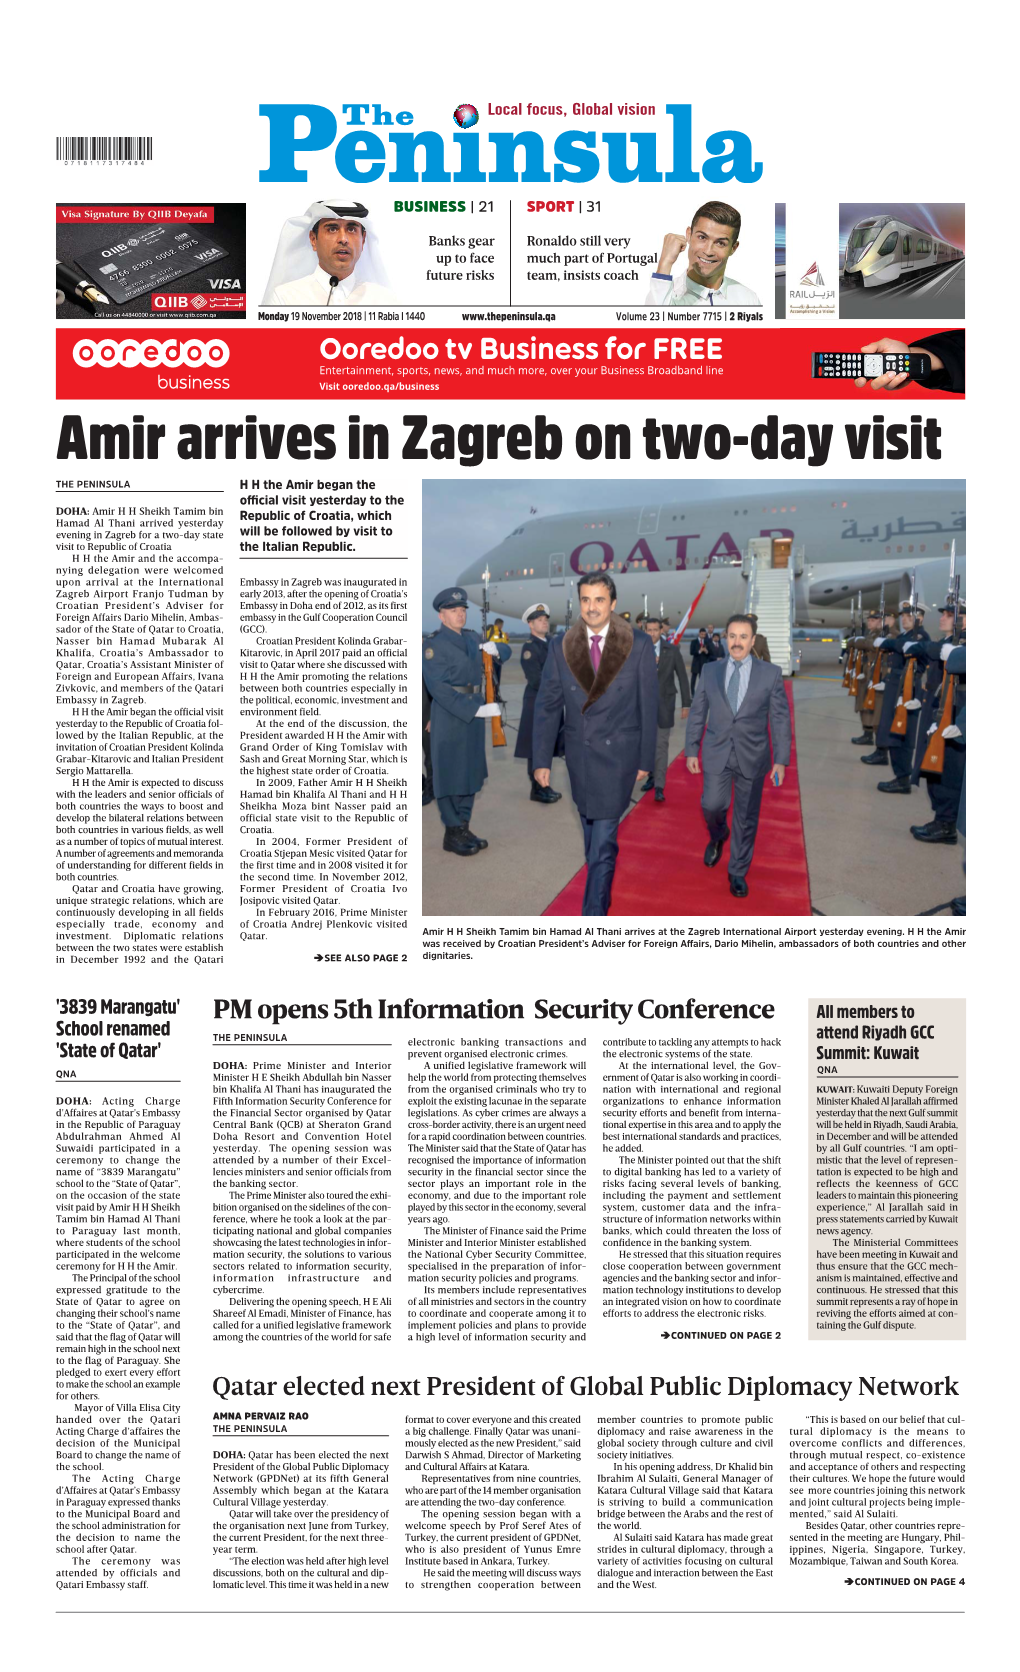 Amir Arrives in Zagreb on Two-Day Visit